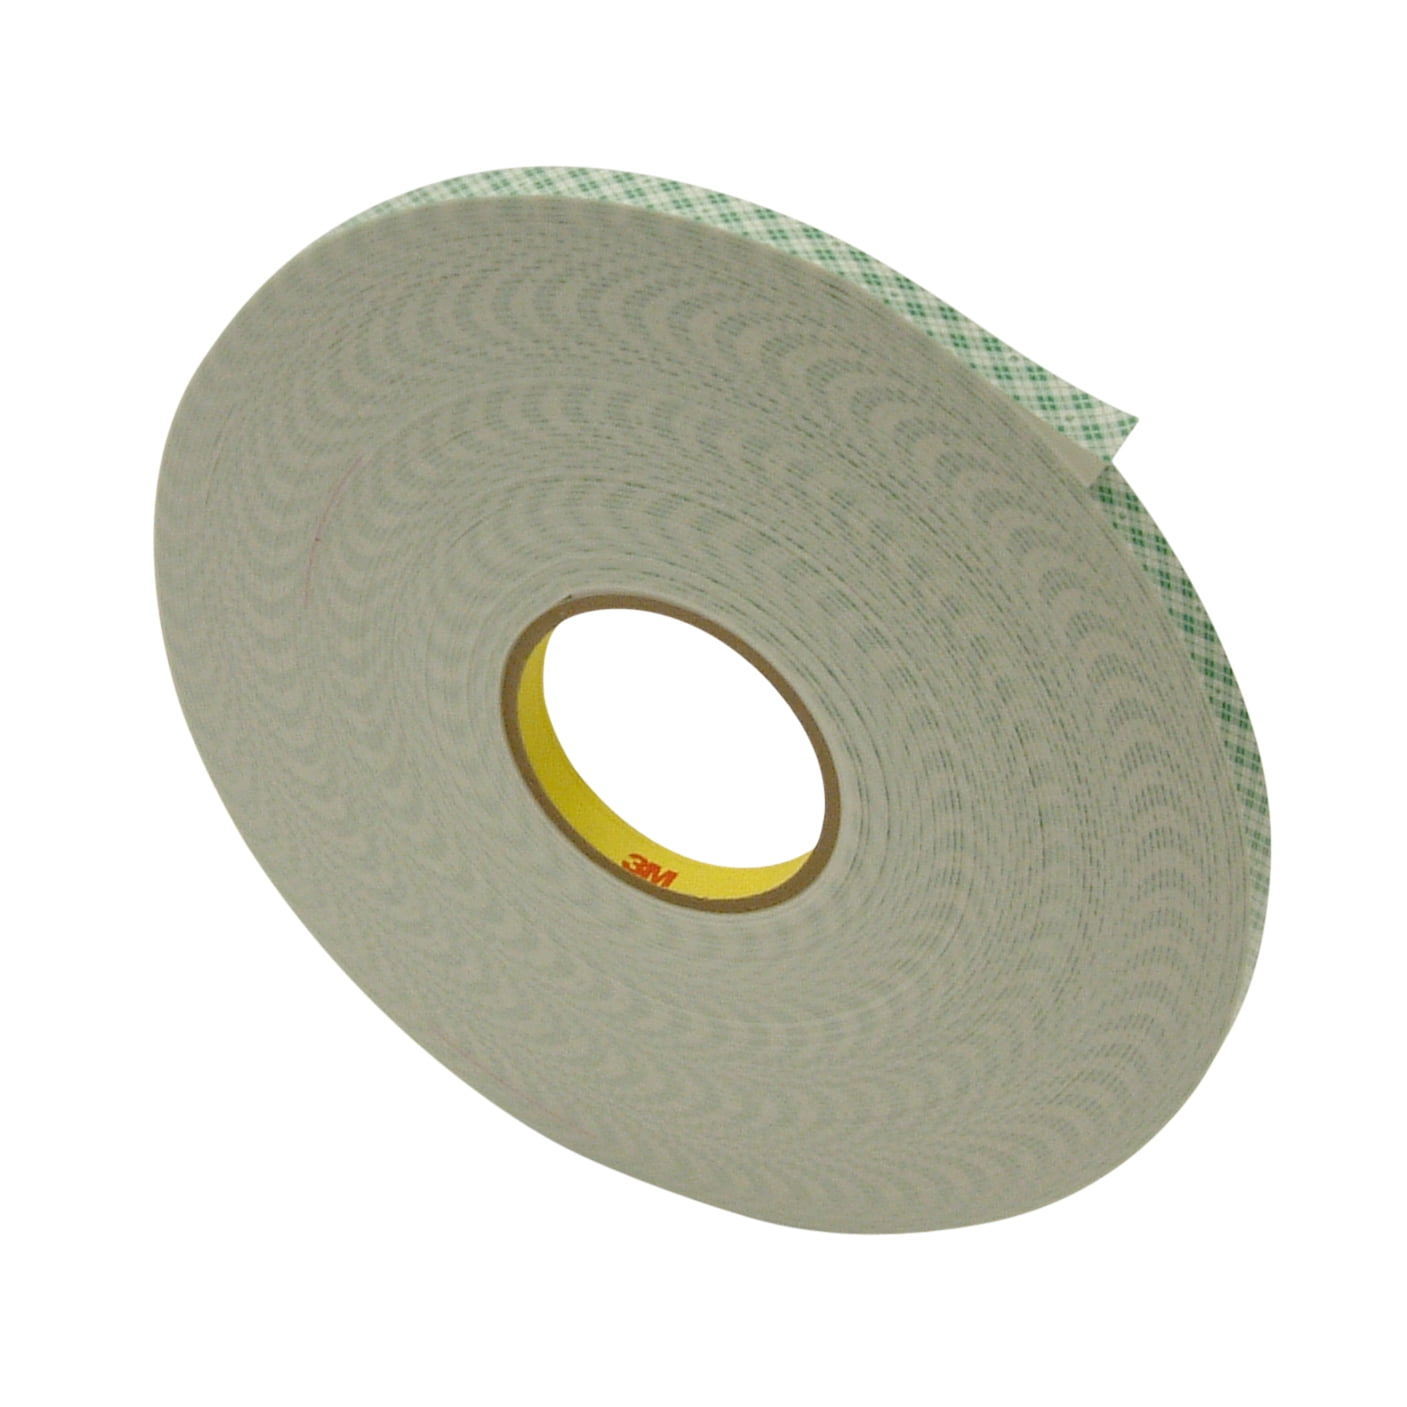 1 in x 36 yd 1/16 in 3M™ Double Coated Urethane Foam Tape 4016 Off-White 